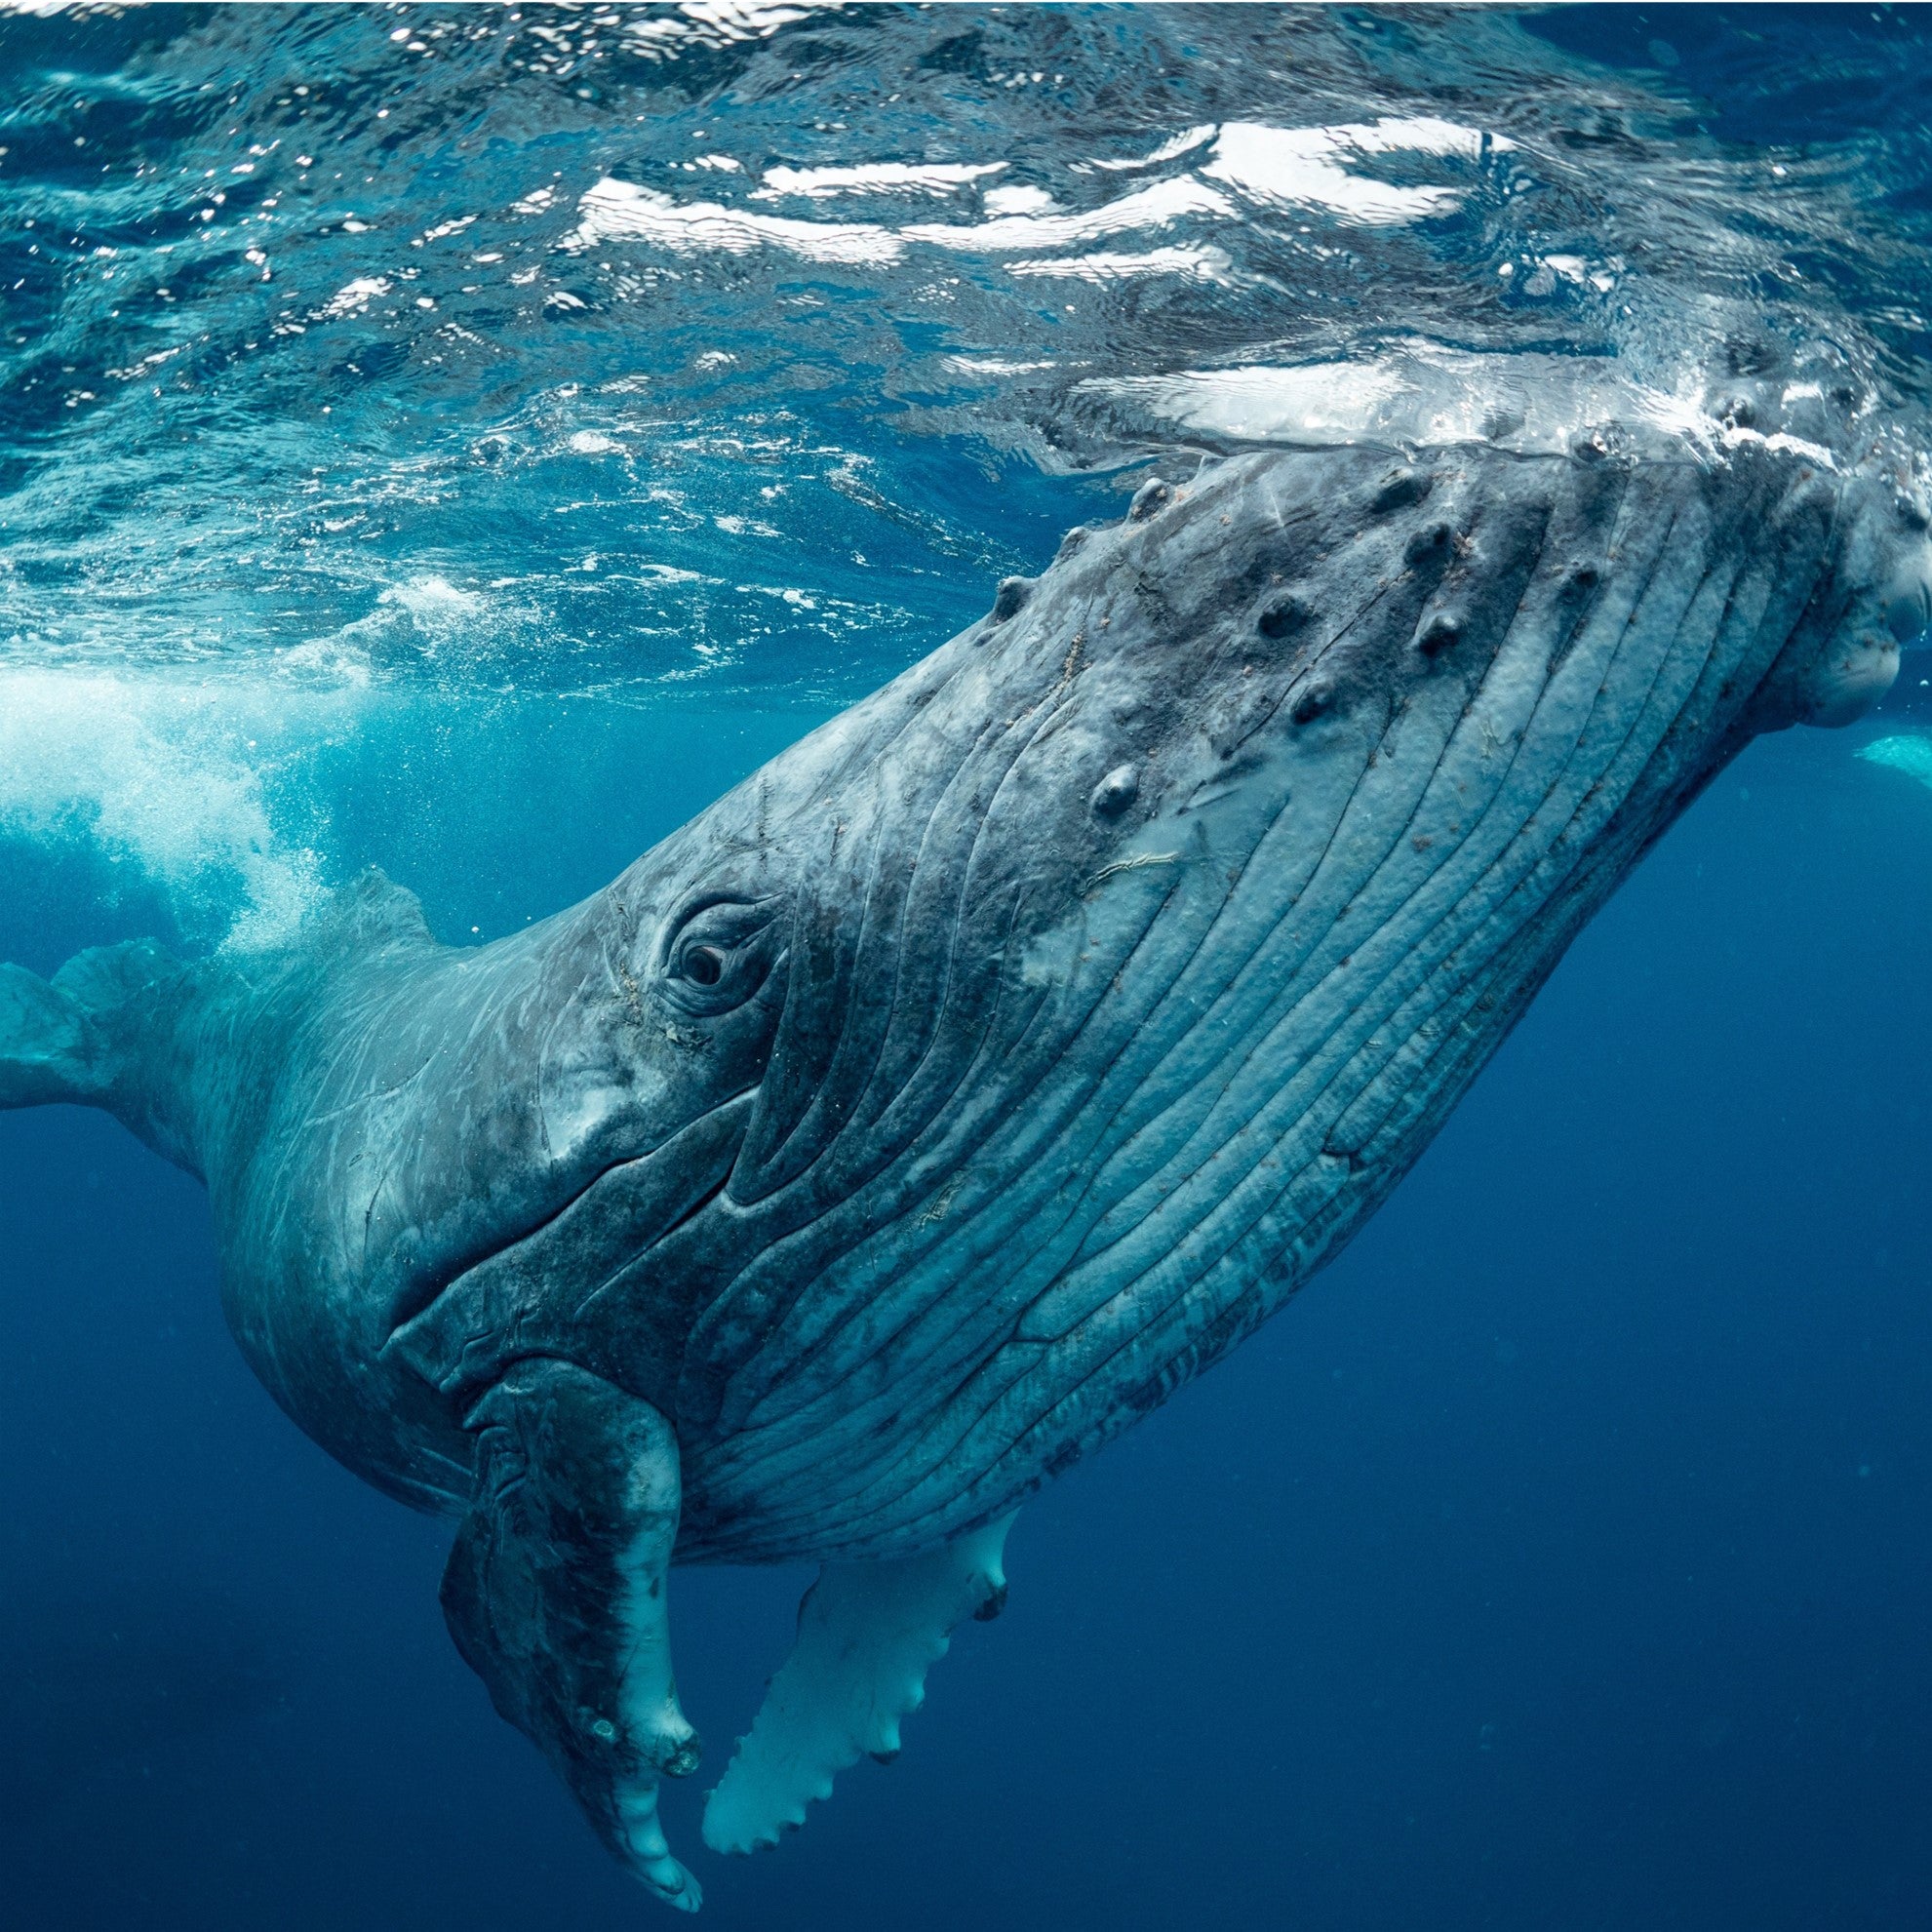 An underwater photo of a humpback whale